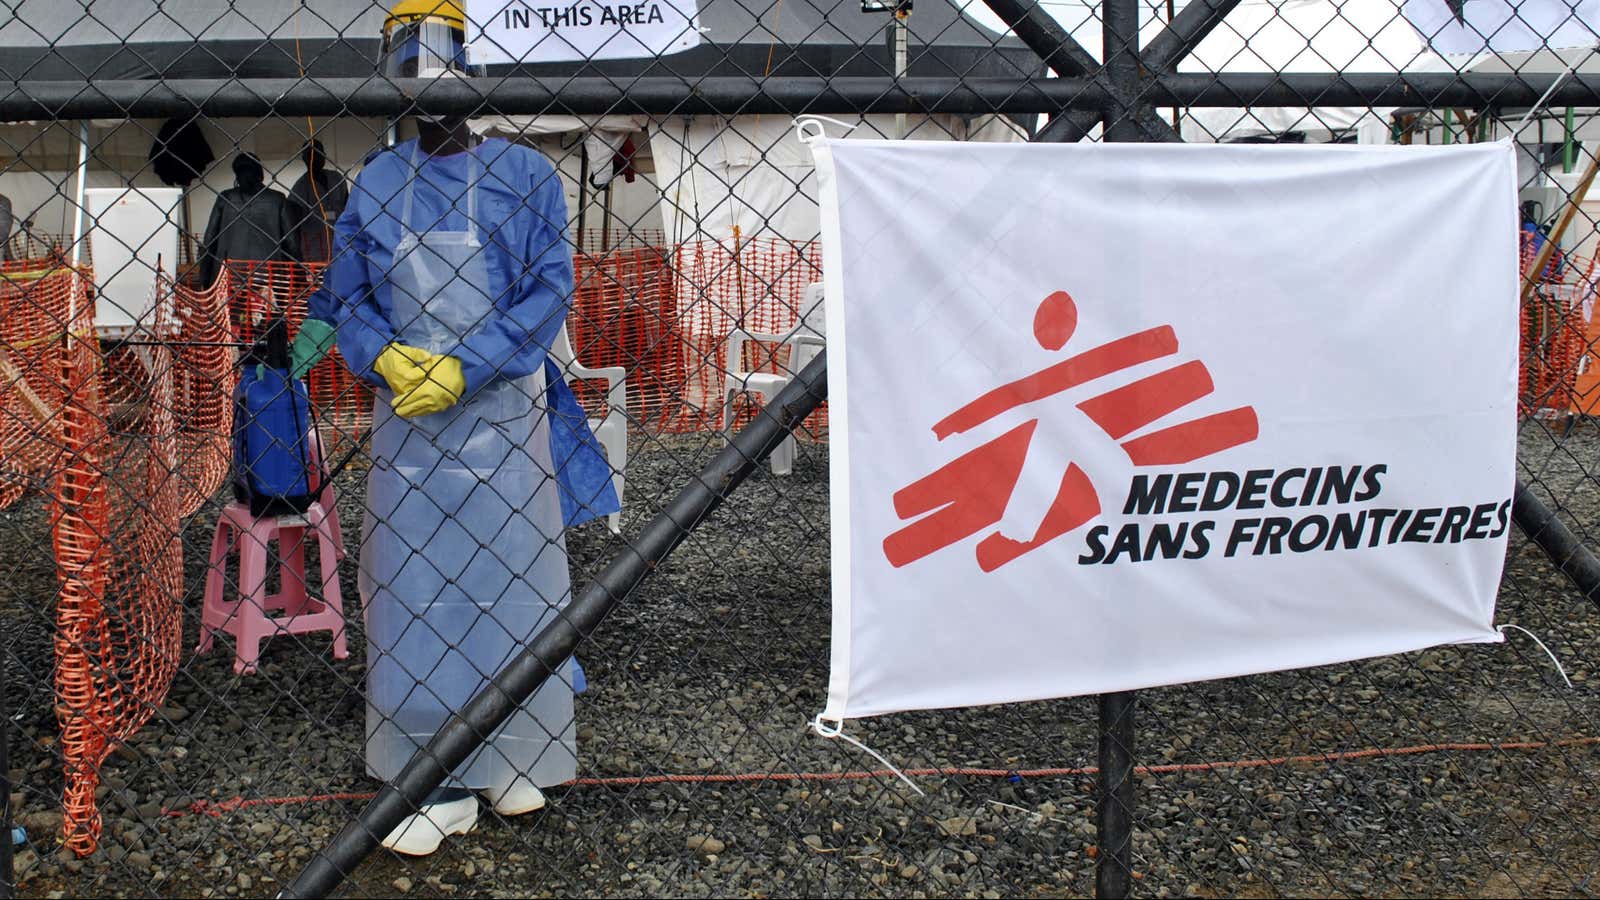 Doctors Without Borders goes where no one else will and works with those who can’t get help anywhere else.